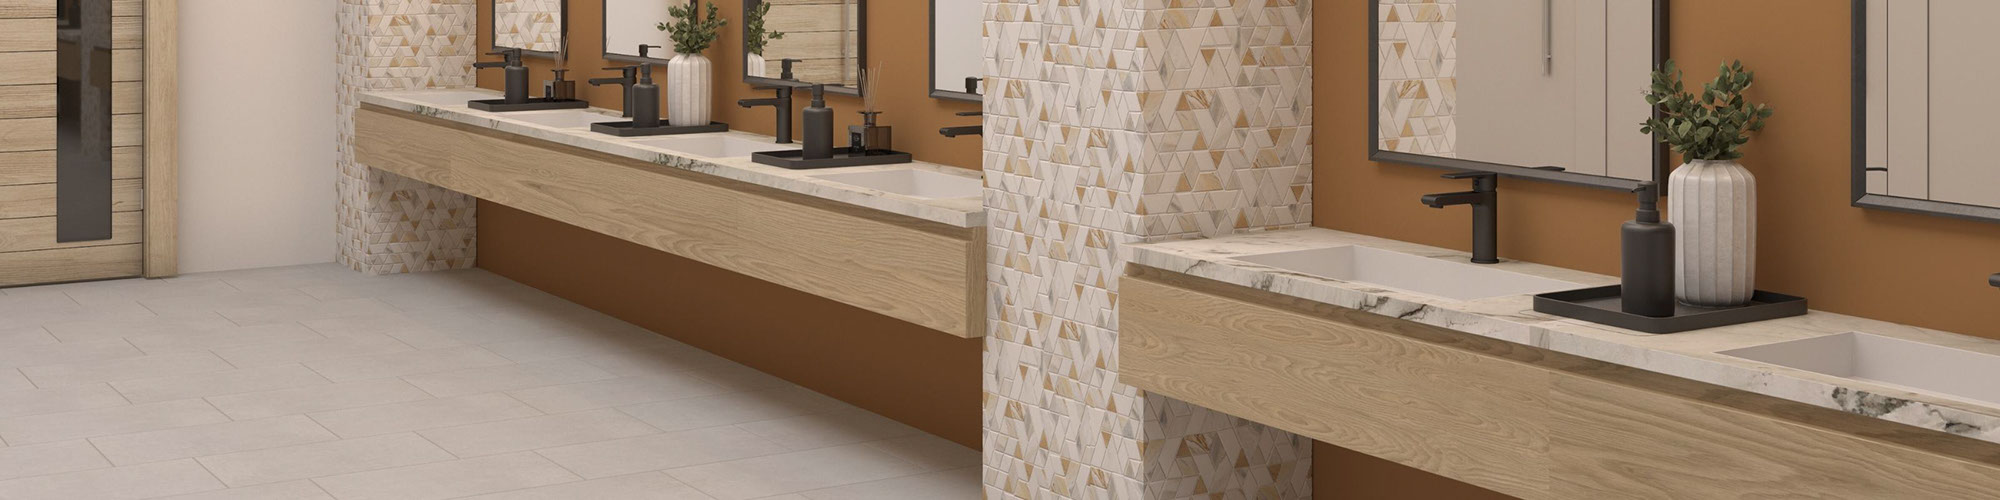 Convention center bathroom with beige floor tile, pillars covered with white marble & brass mosaic tile, floating vanity with under-mount sinks, and mirrors on butterscotch backsplash.